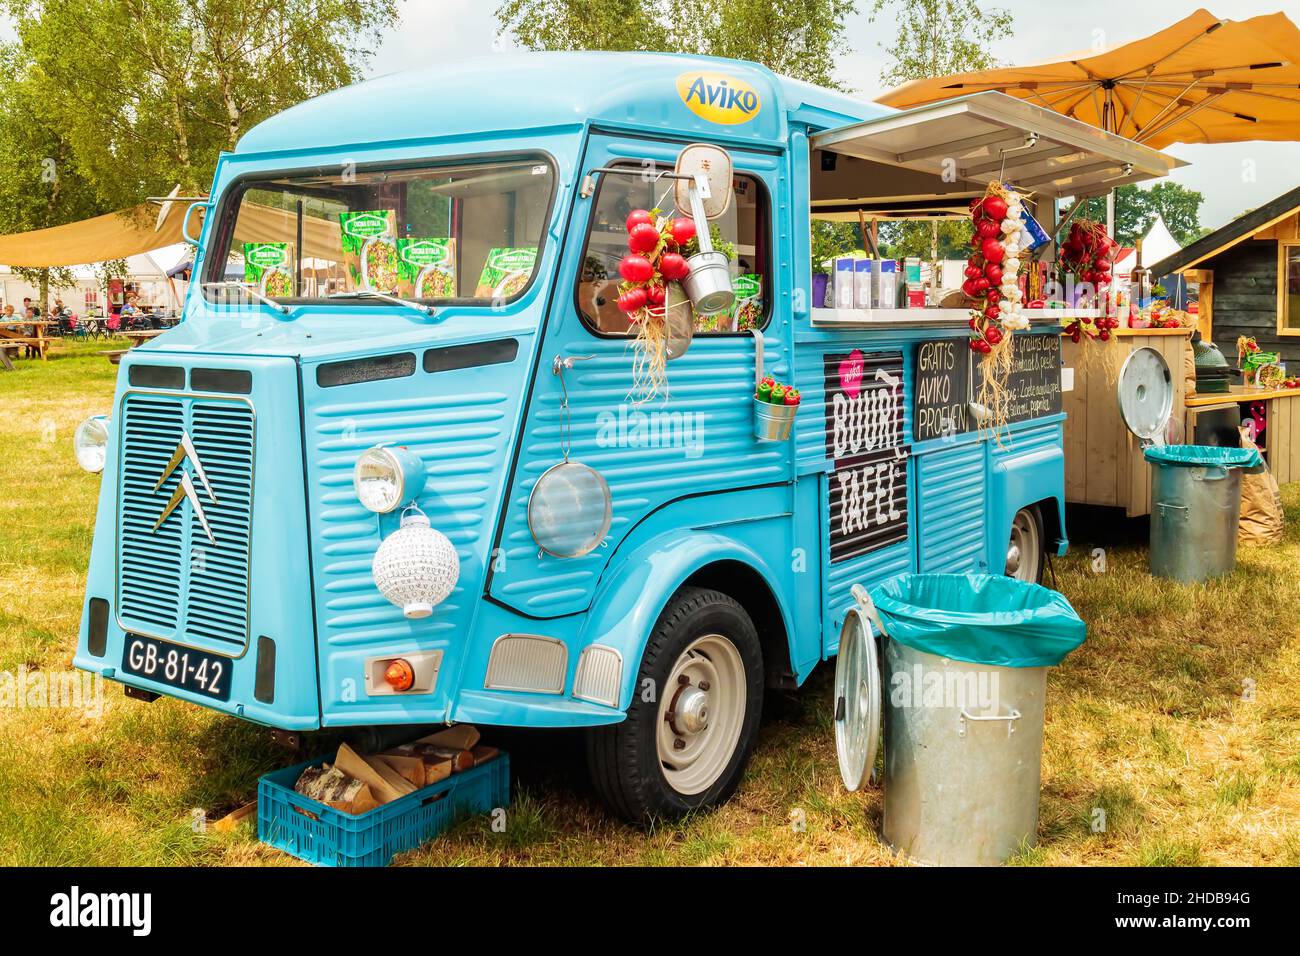 AALTEN, THE NETHERLANDS - JUNE 26, 2017: Vintage blue food truck on a country fair in Aalten, The Netherlands Stock Photo